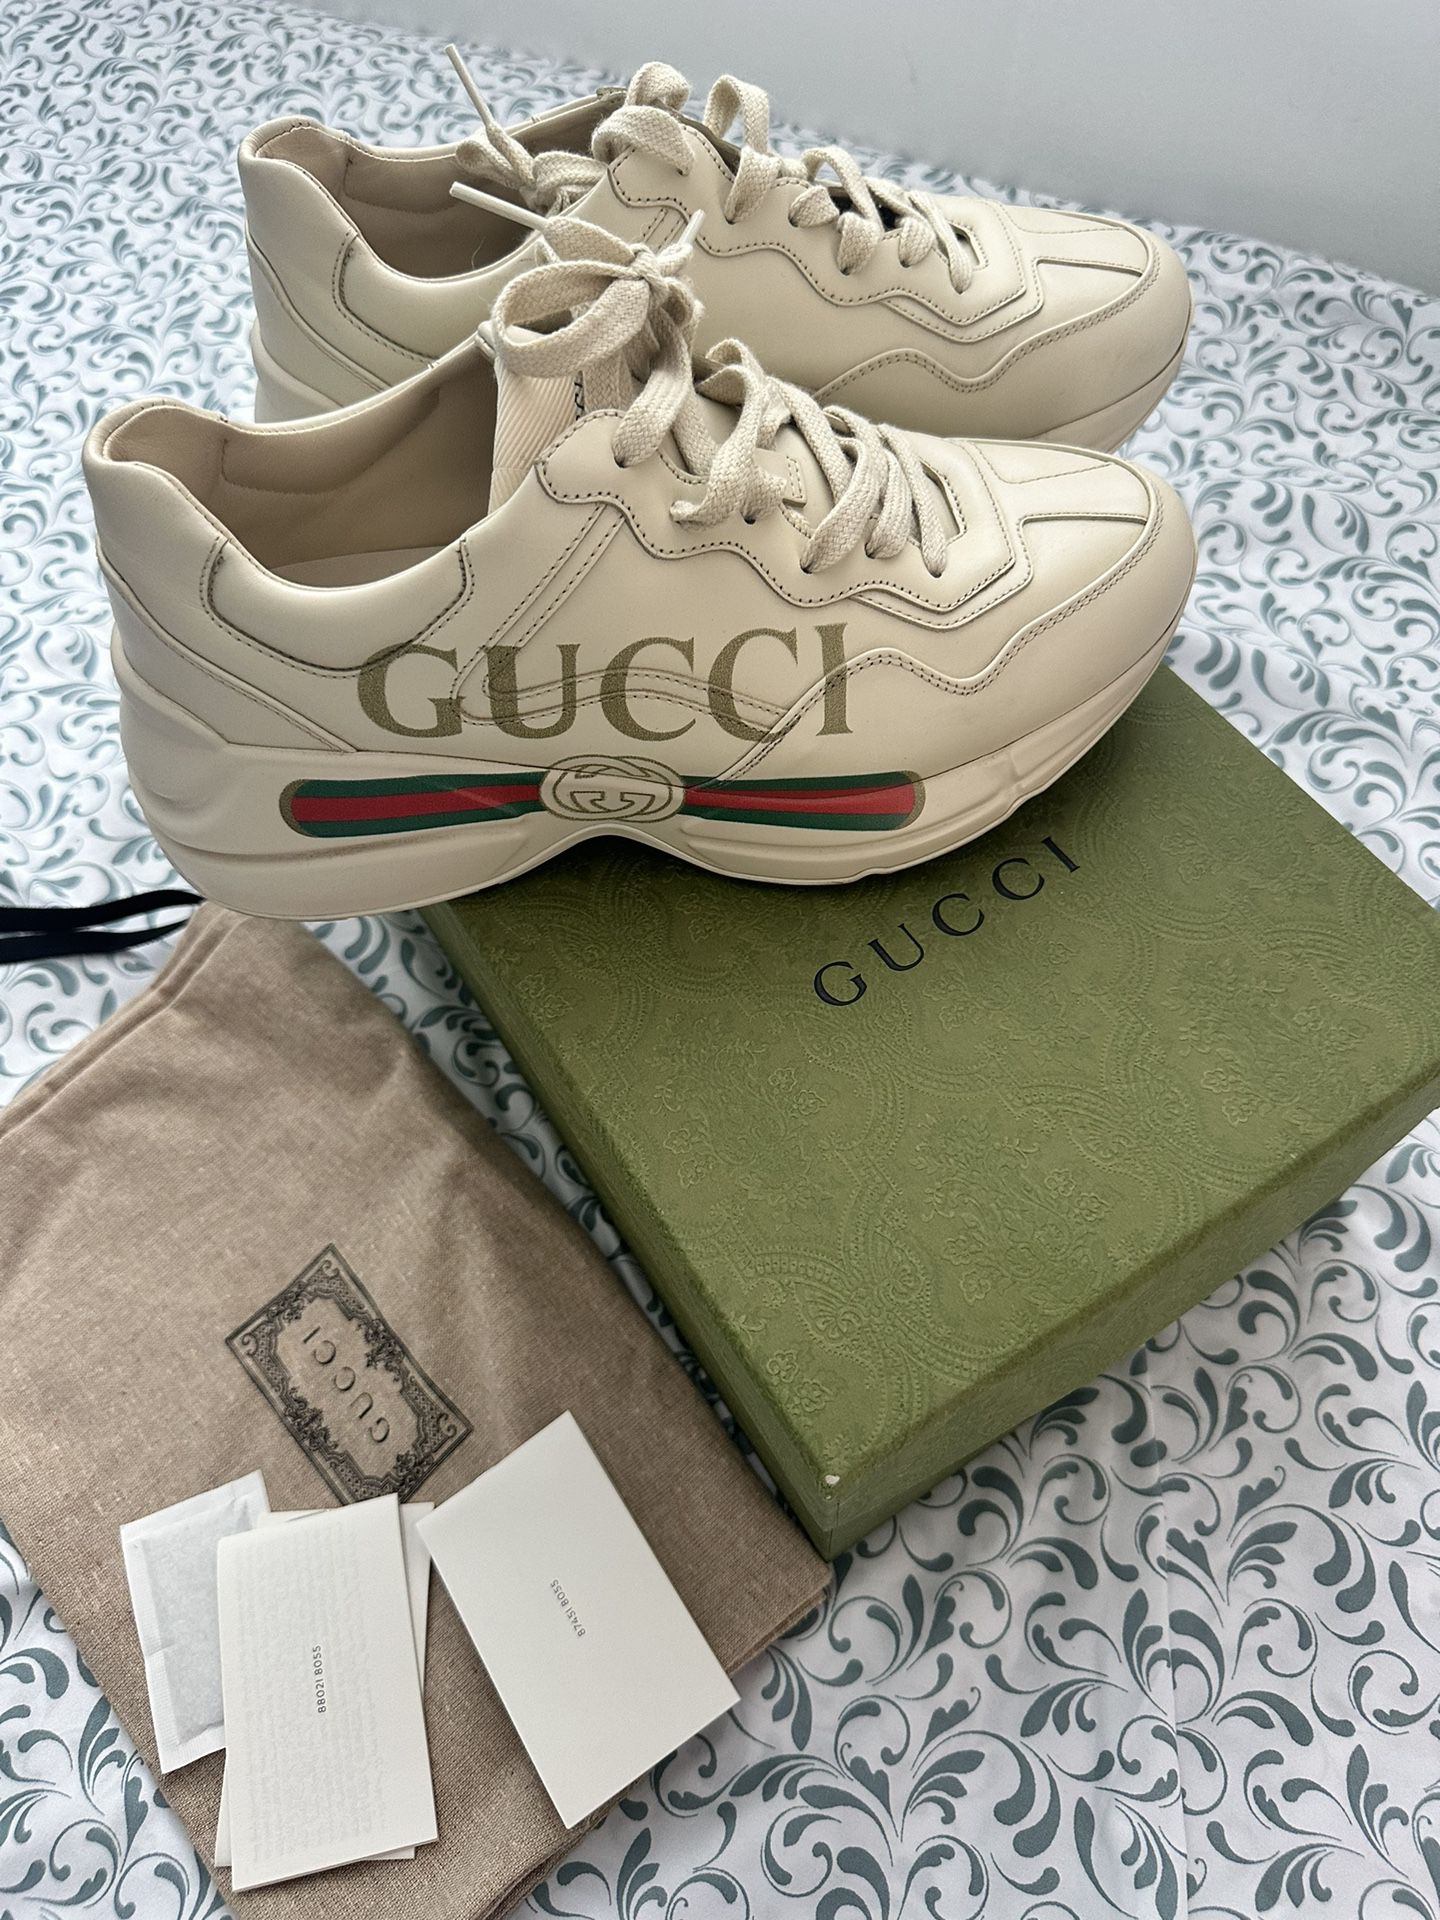 Gucci Shoes for Sale in Carson, CA - OfferUp